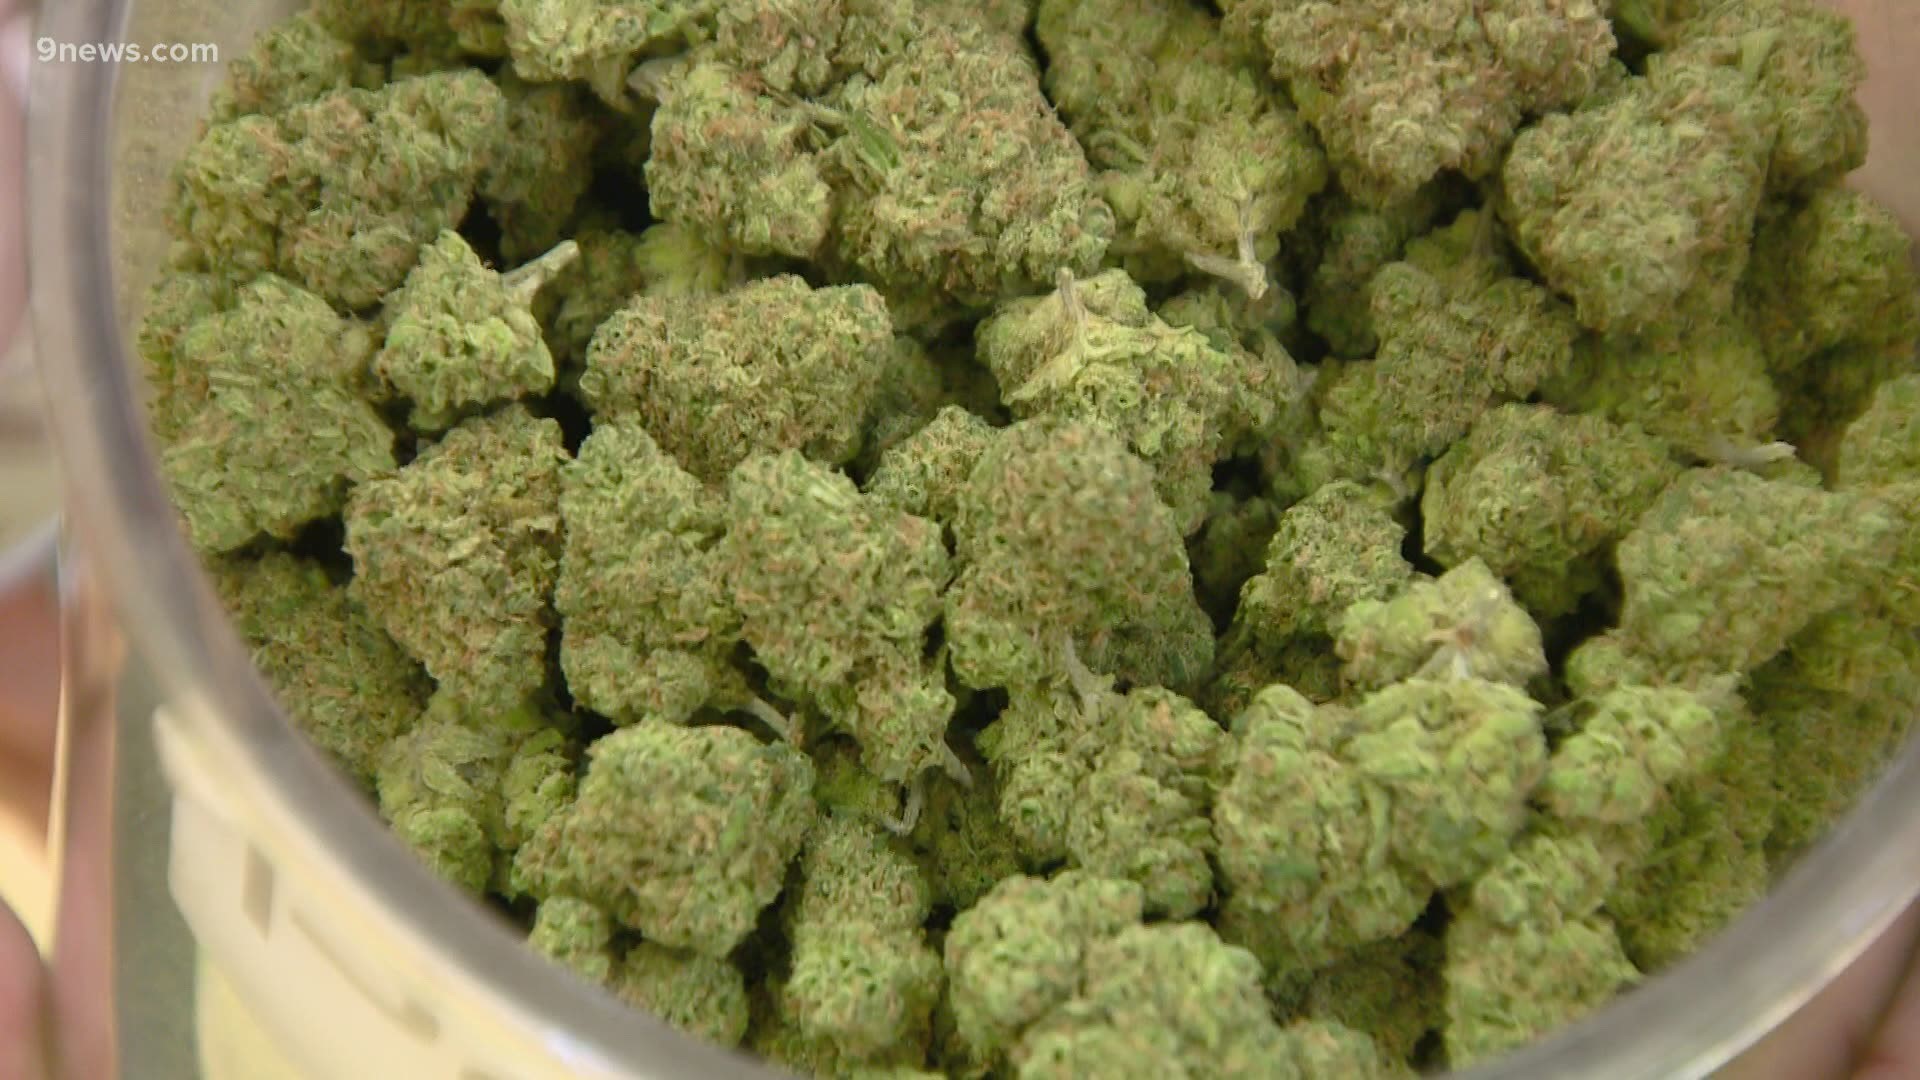 Denver City Council will decide whether or not  to allow pot deliveries and hospitality establishments.